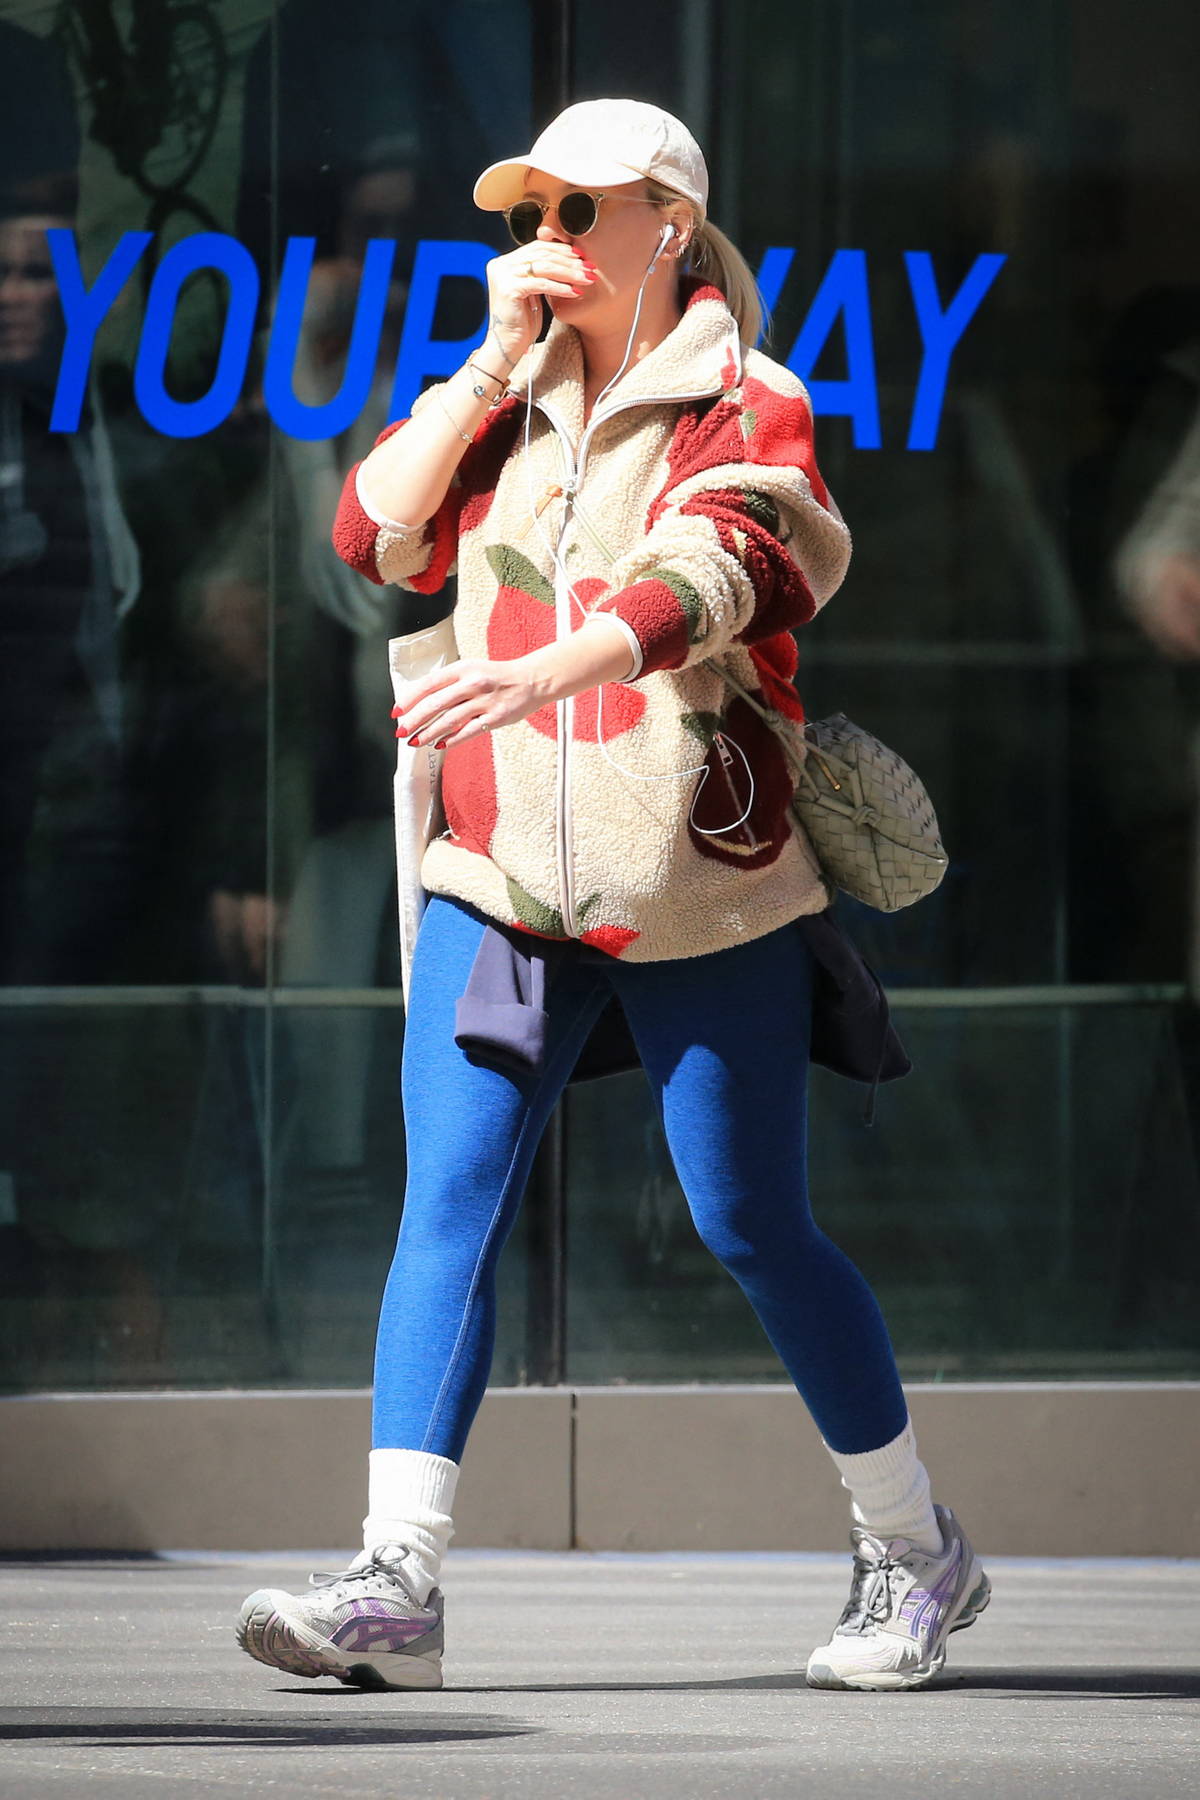 Scarlett Johansson dons skintight blue leggings and a baseball cap as she  steps out in New York City